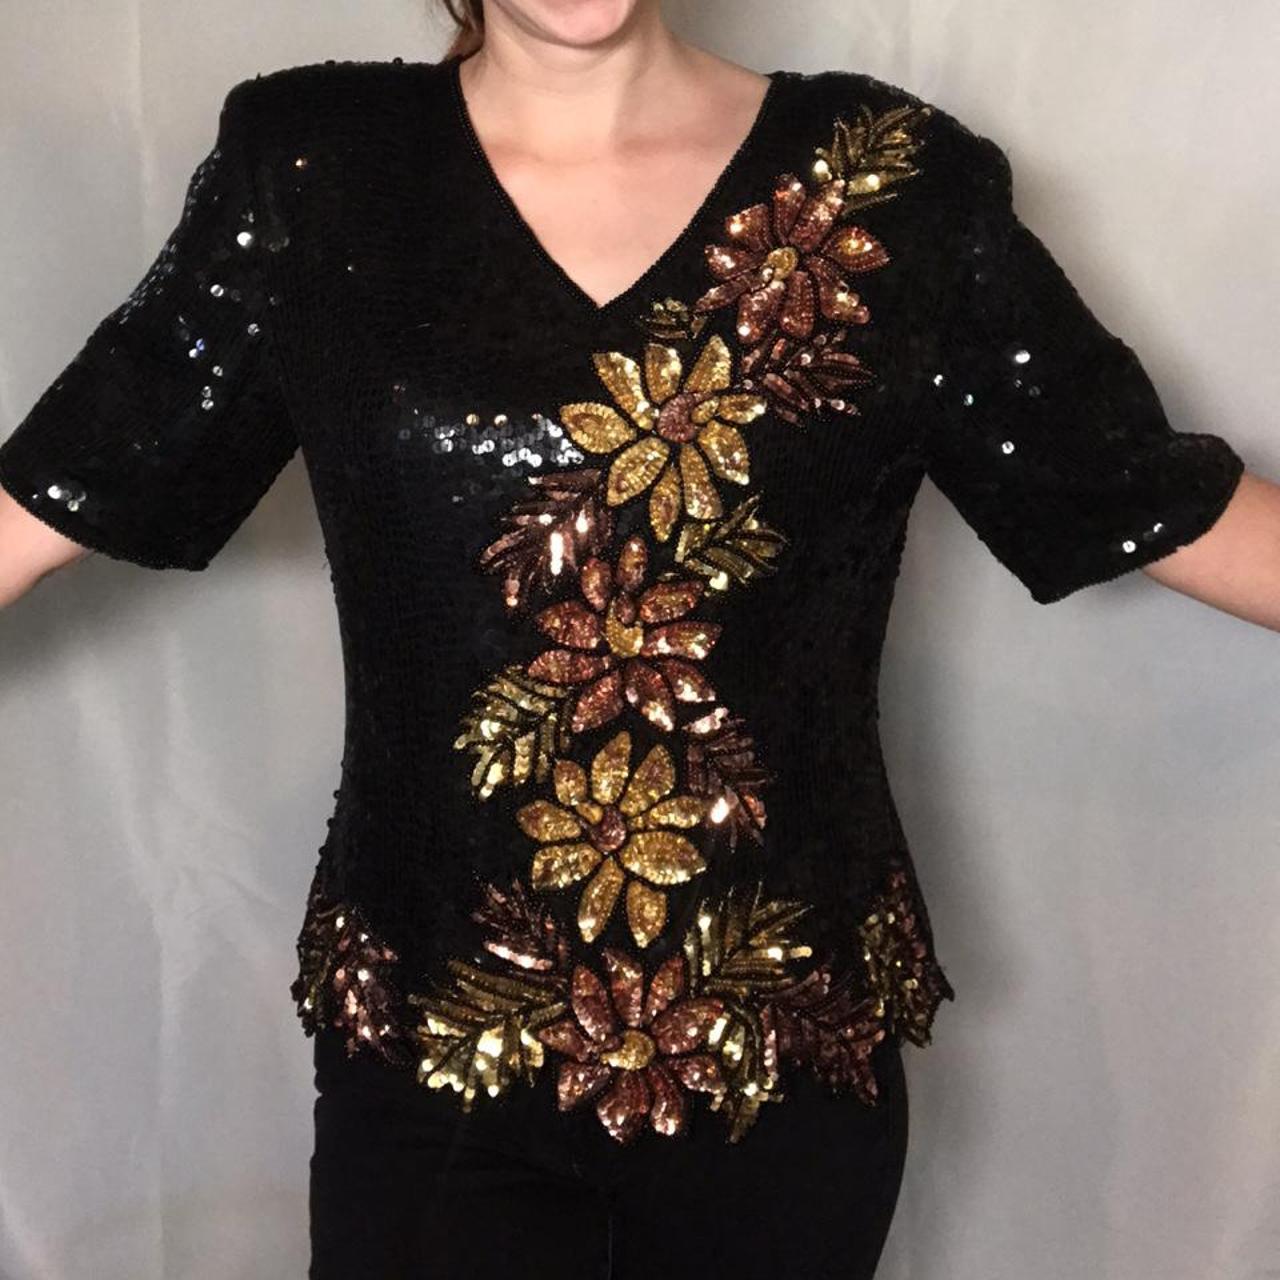 American Vintage Women's Black and Gold Top (3)